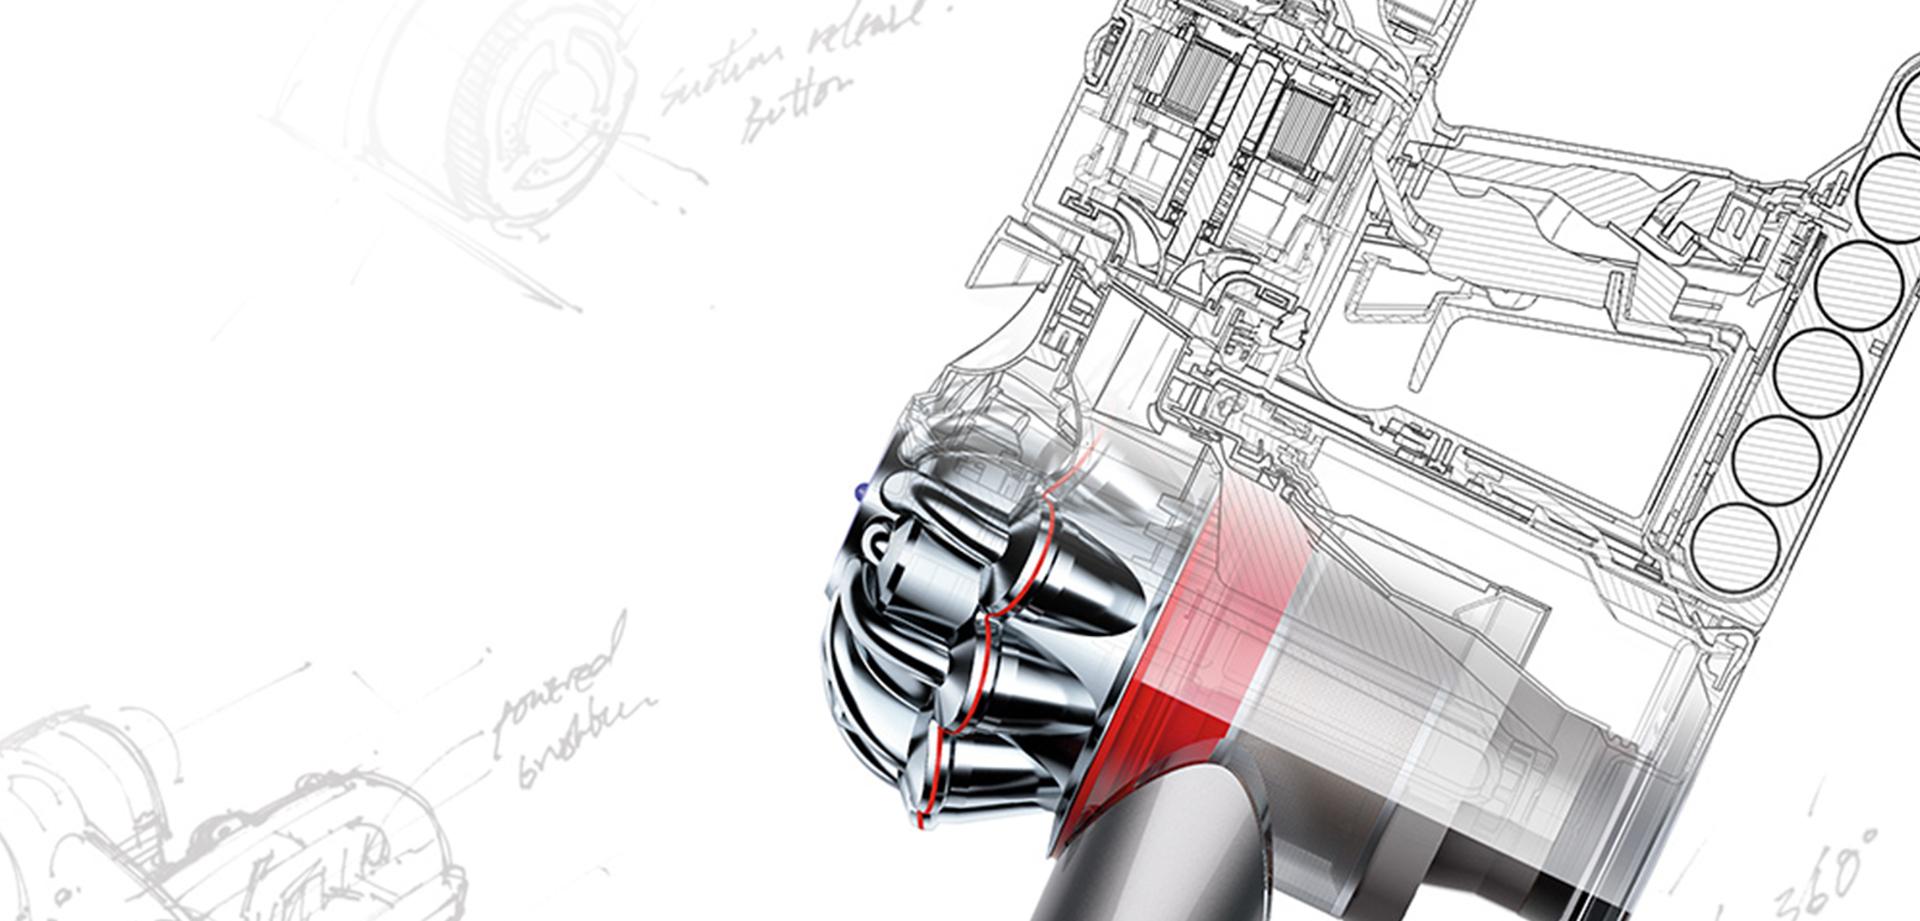 Sketch of inside of Dyson vacuum cleaner